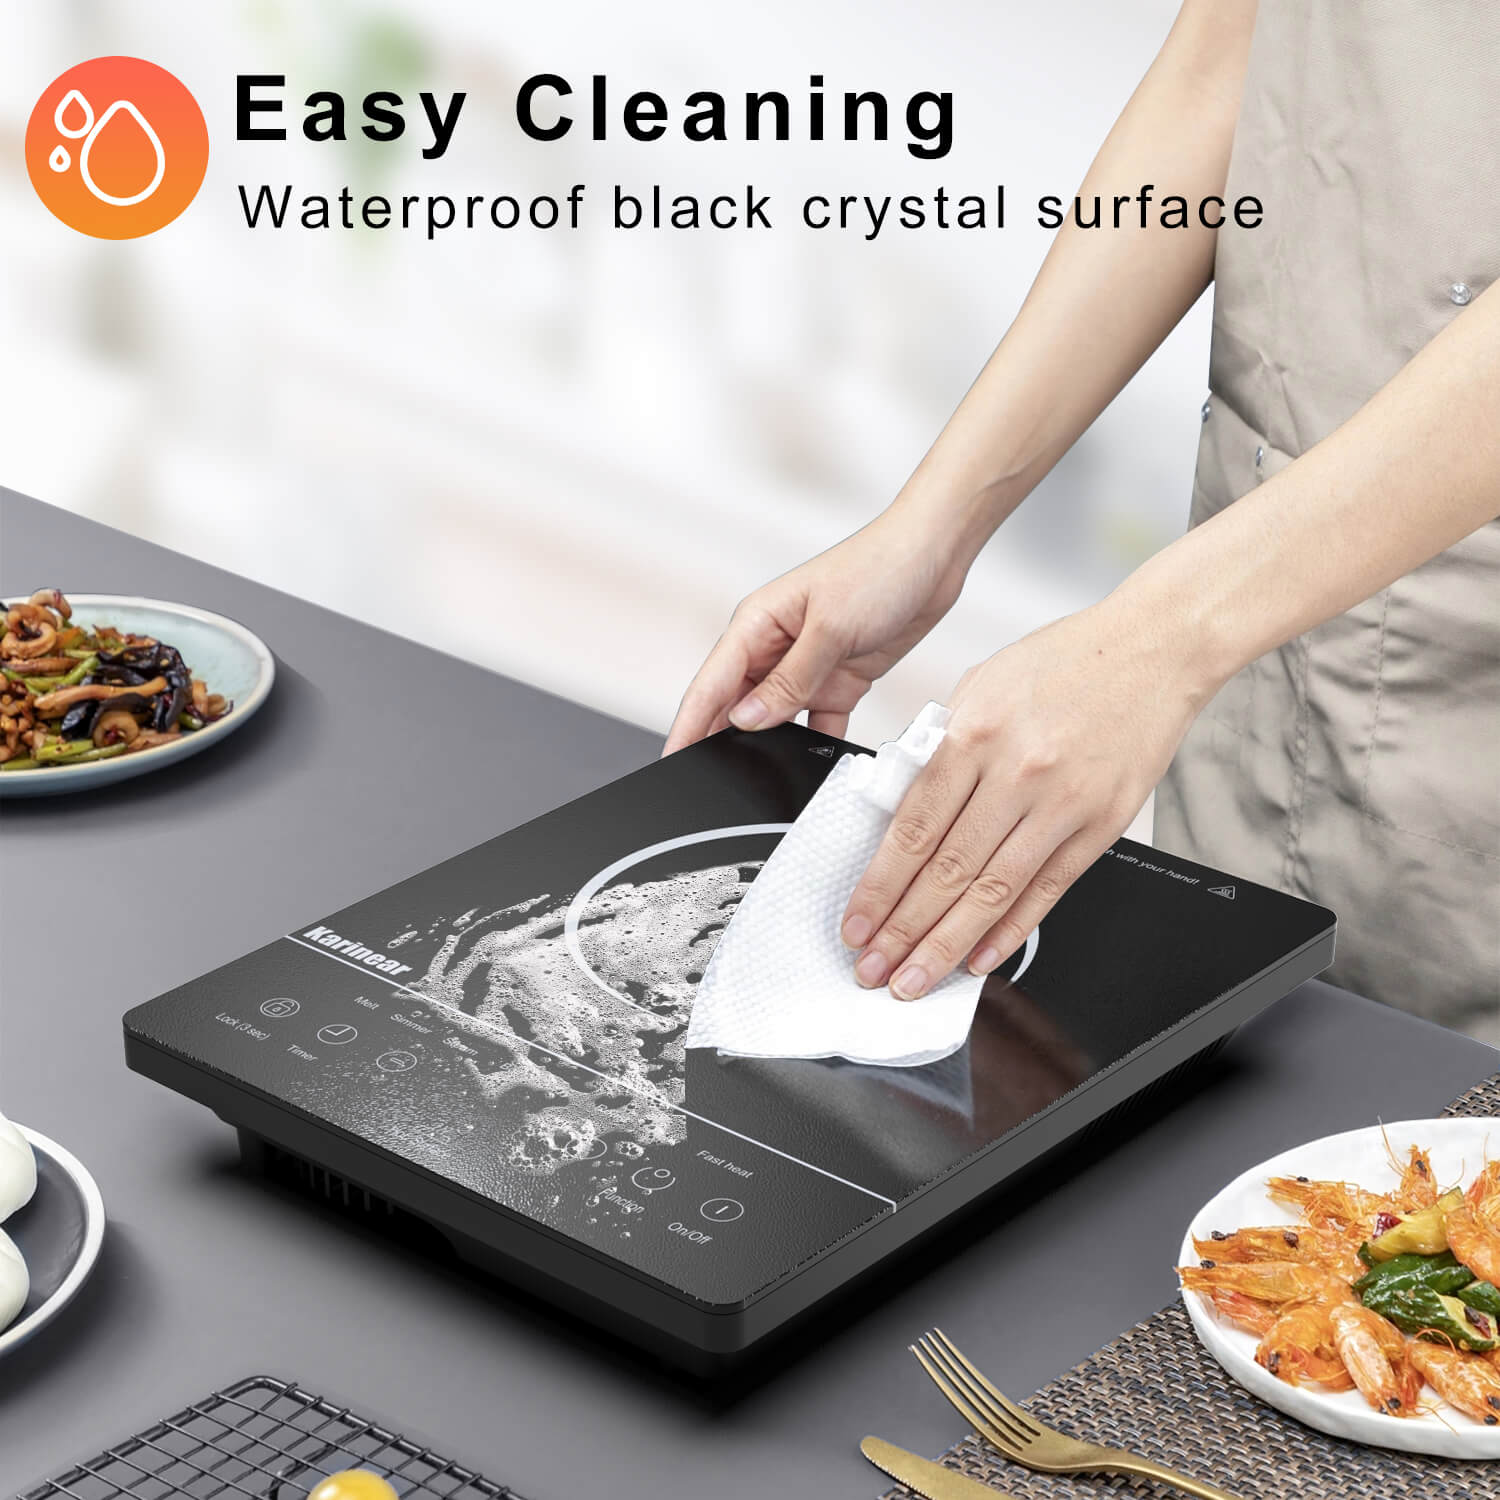 The surface of the electric stove is made of smooth glass, which is very easy to clean, requiring only a wipe with a damp cloth.